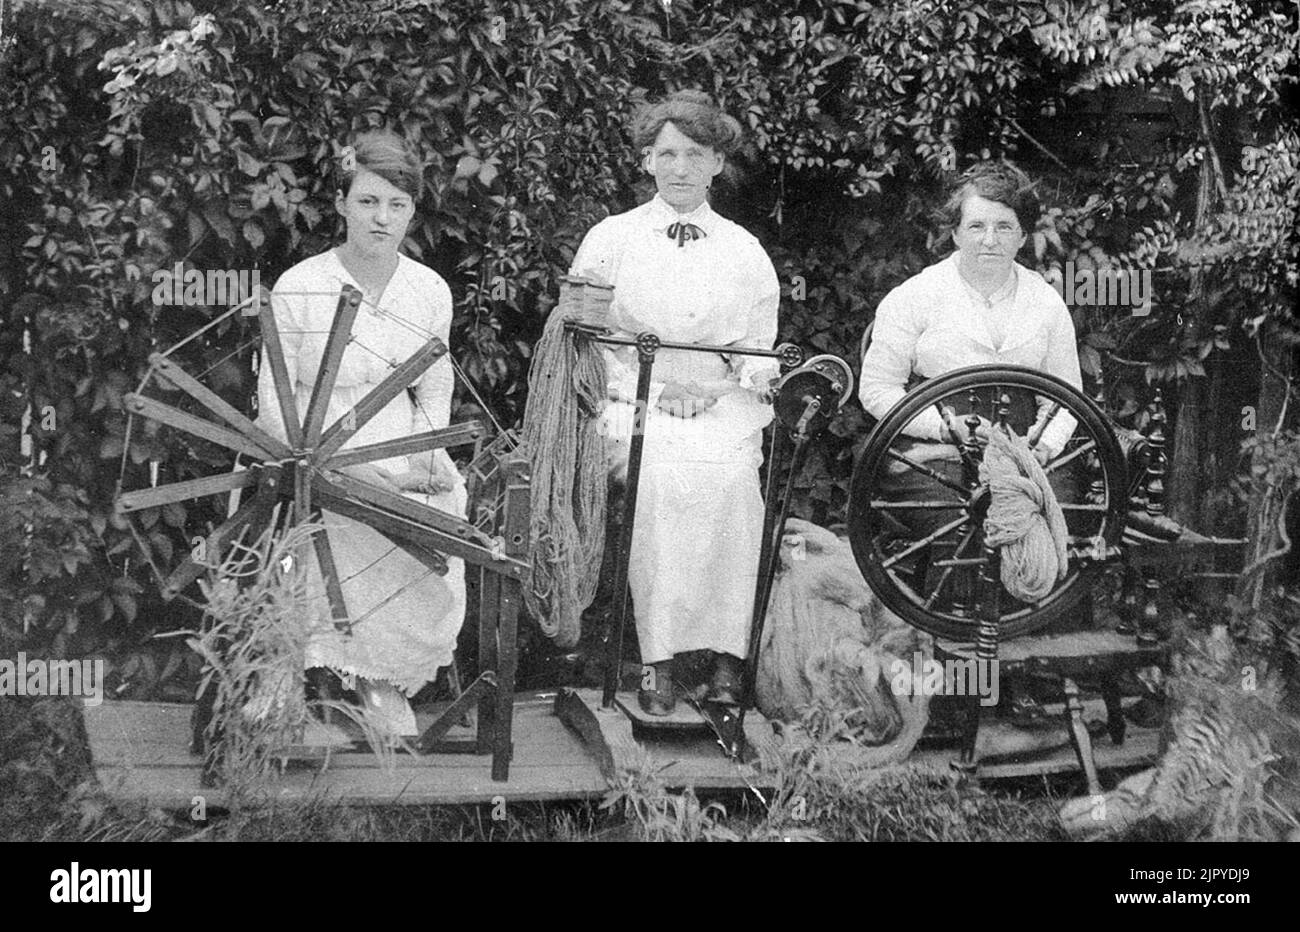 Three women spinning wool to knit socks for soldiers during World War I - Tenterfield, NSW, ca. 1915 Stock Photo